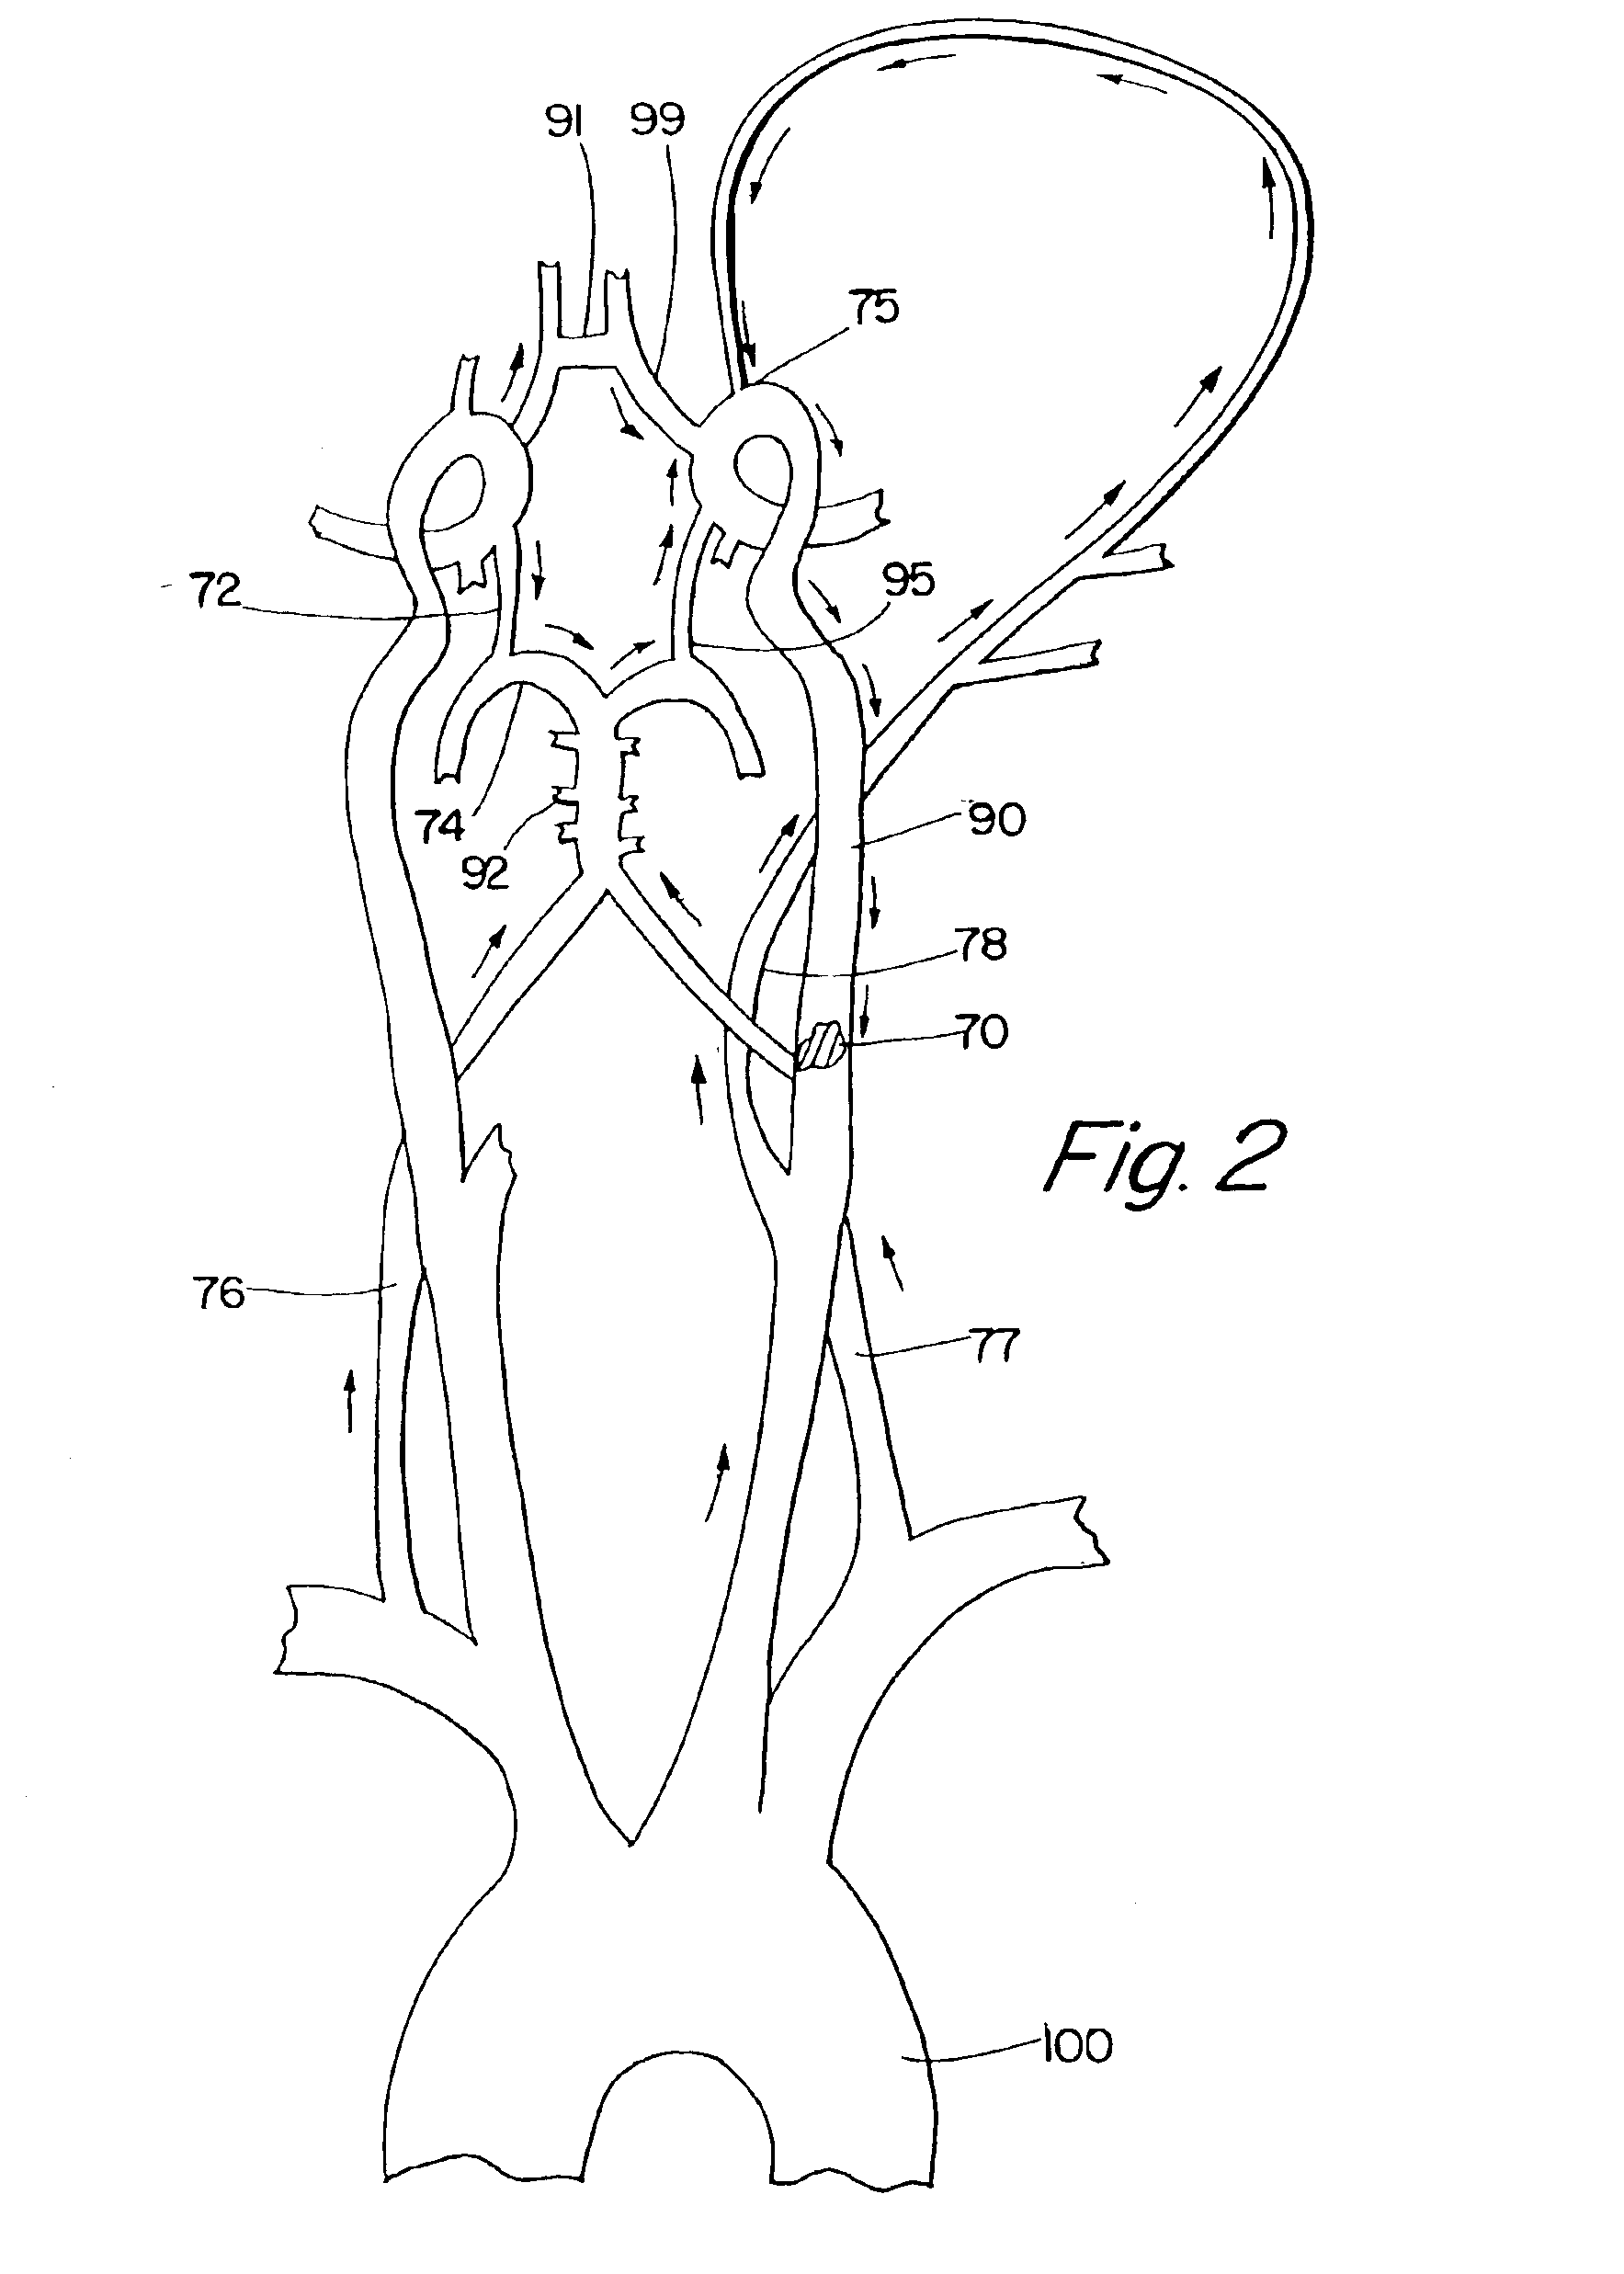 Methods for flow augmentation in patients with occlusive cerebrovascular disease